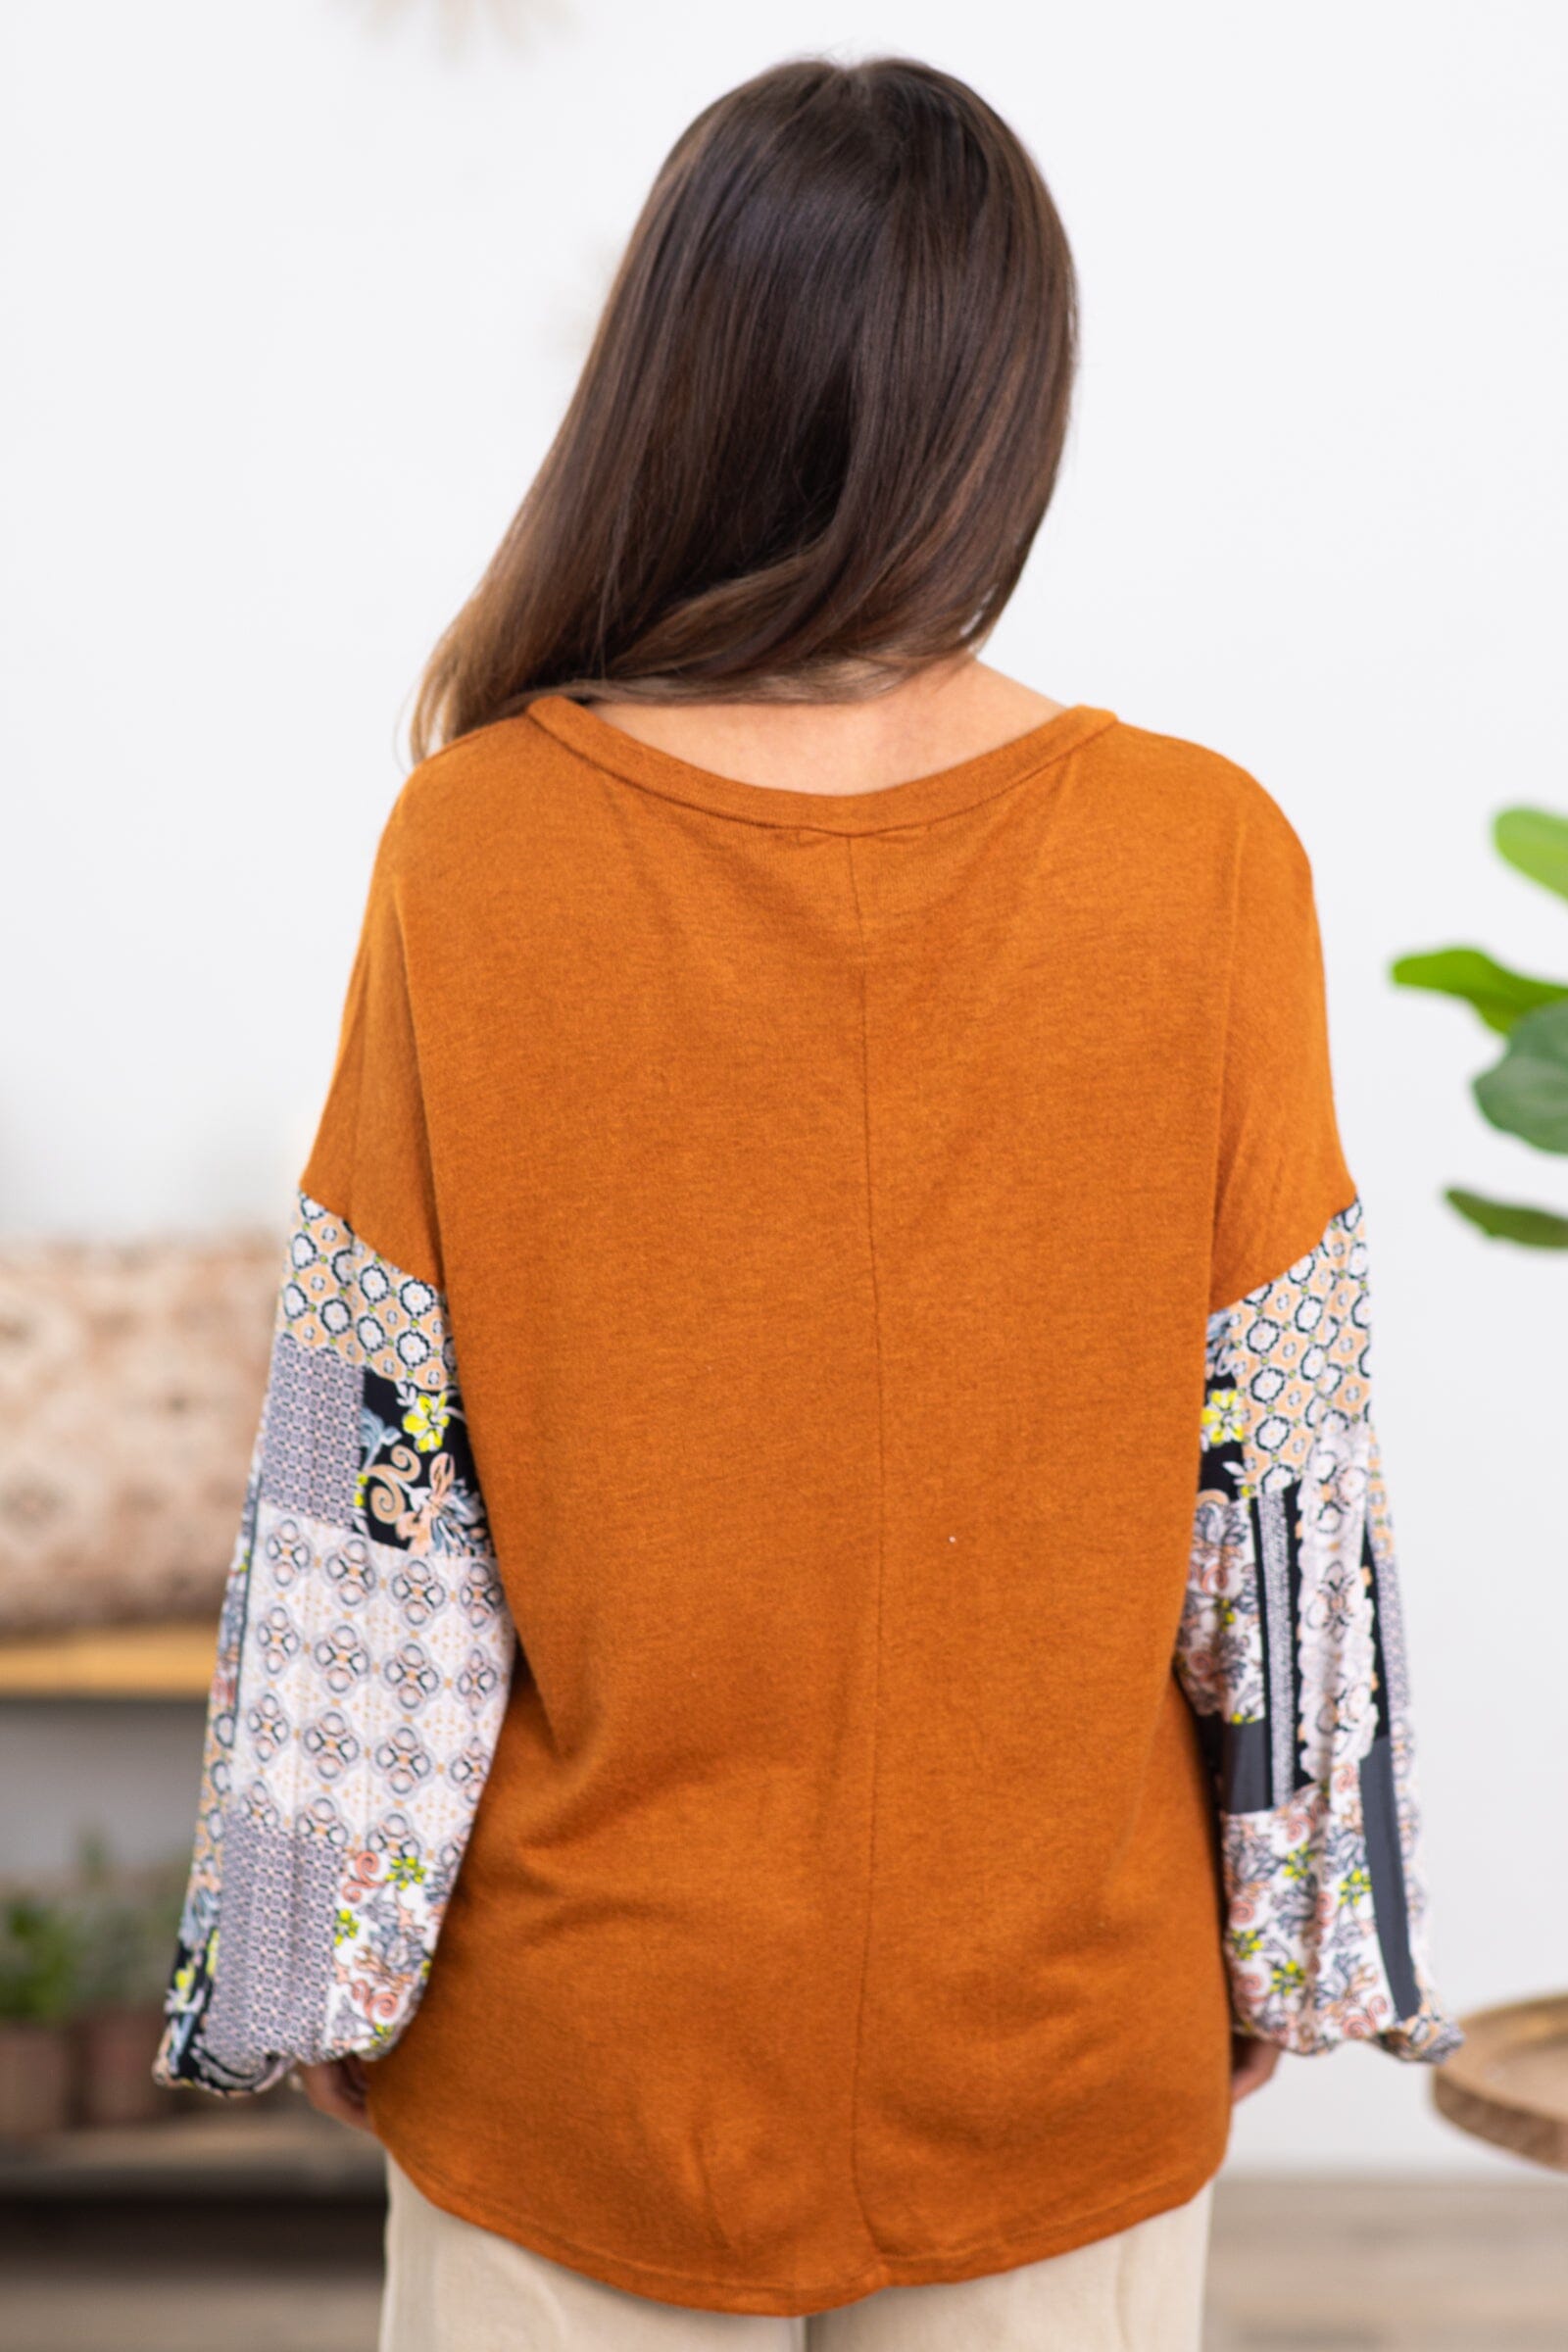 Burnt Orange Top With Paisley Print Sleeves - Filly Flair